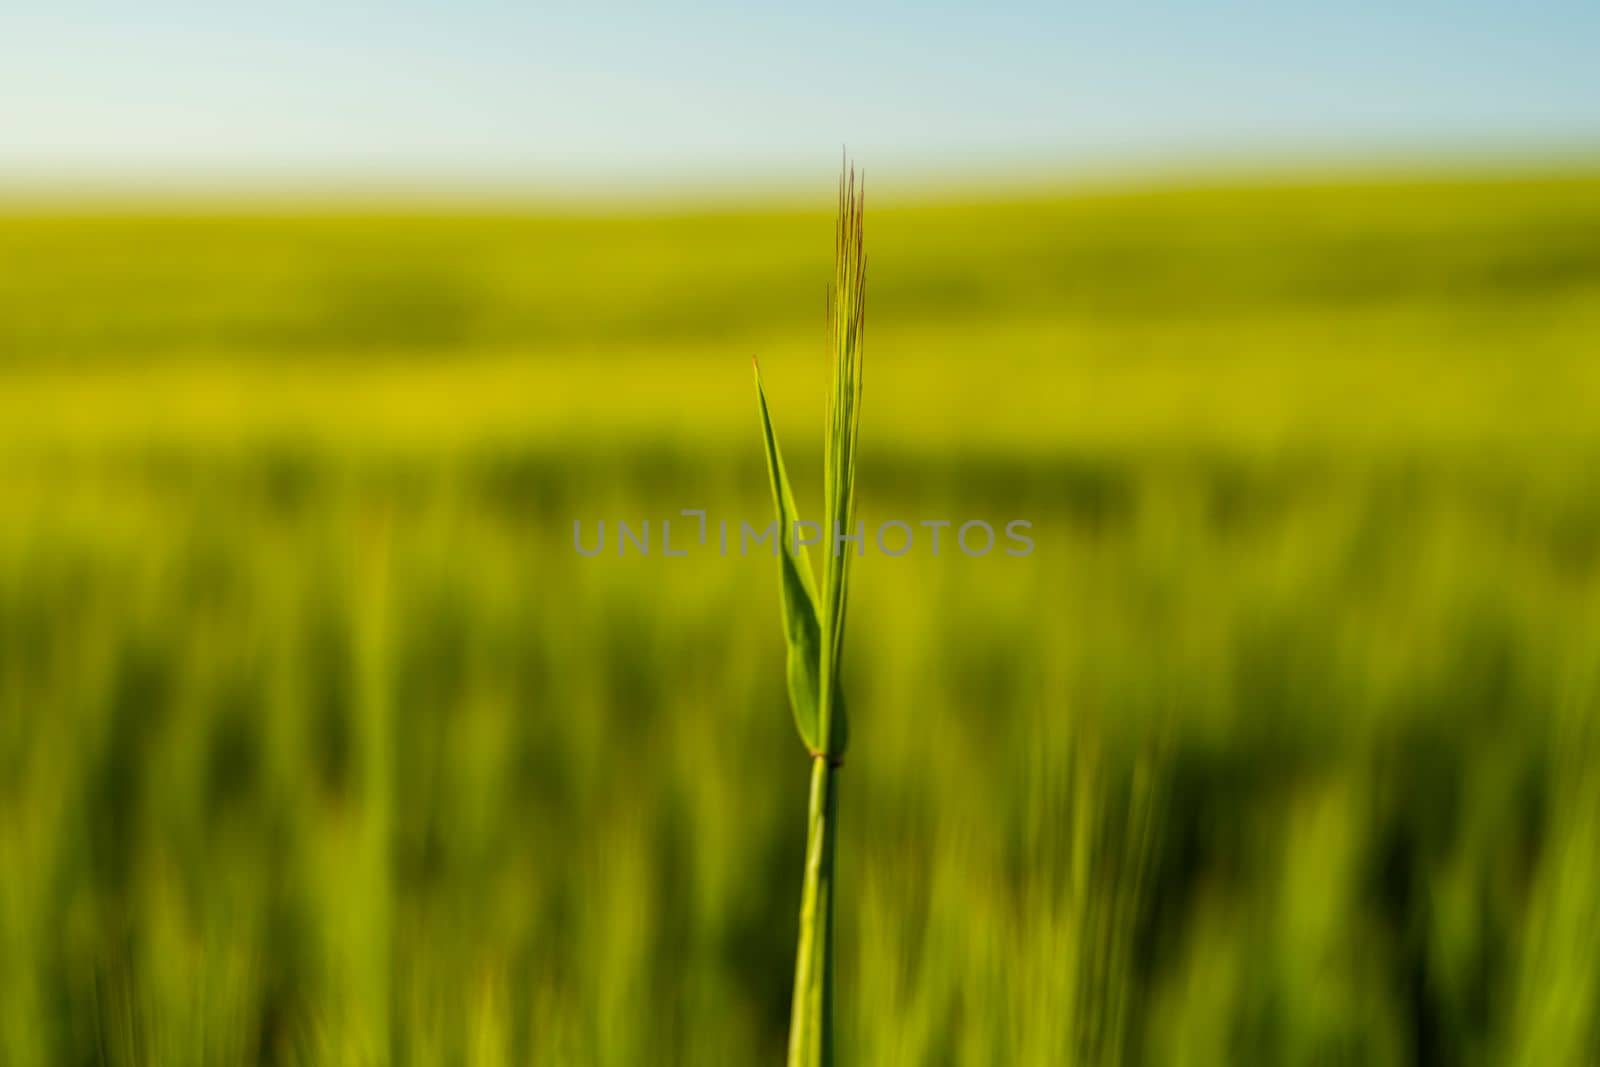 Green barley ear with a agricultural field on background, rural landscape. Green unripe cereals. The concept of agriculture, healthy eating, organic food